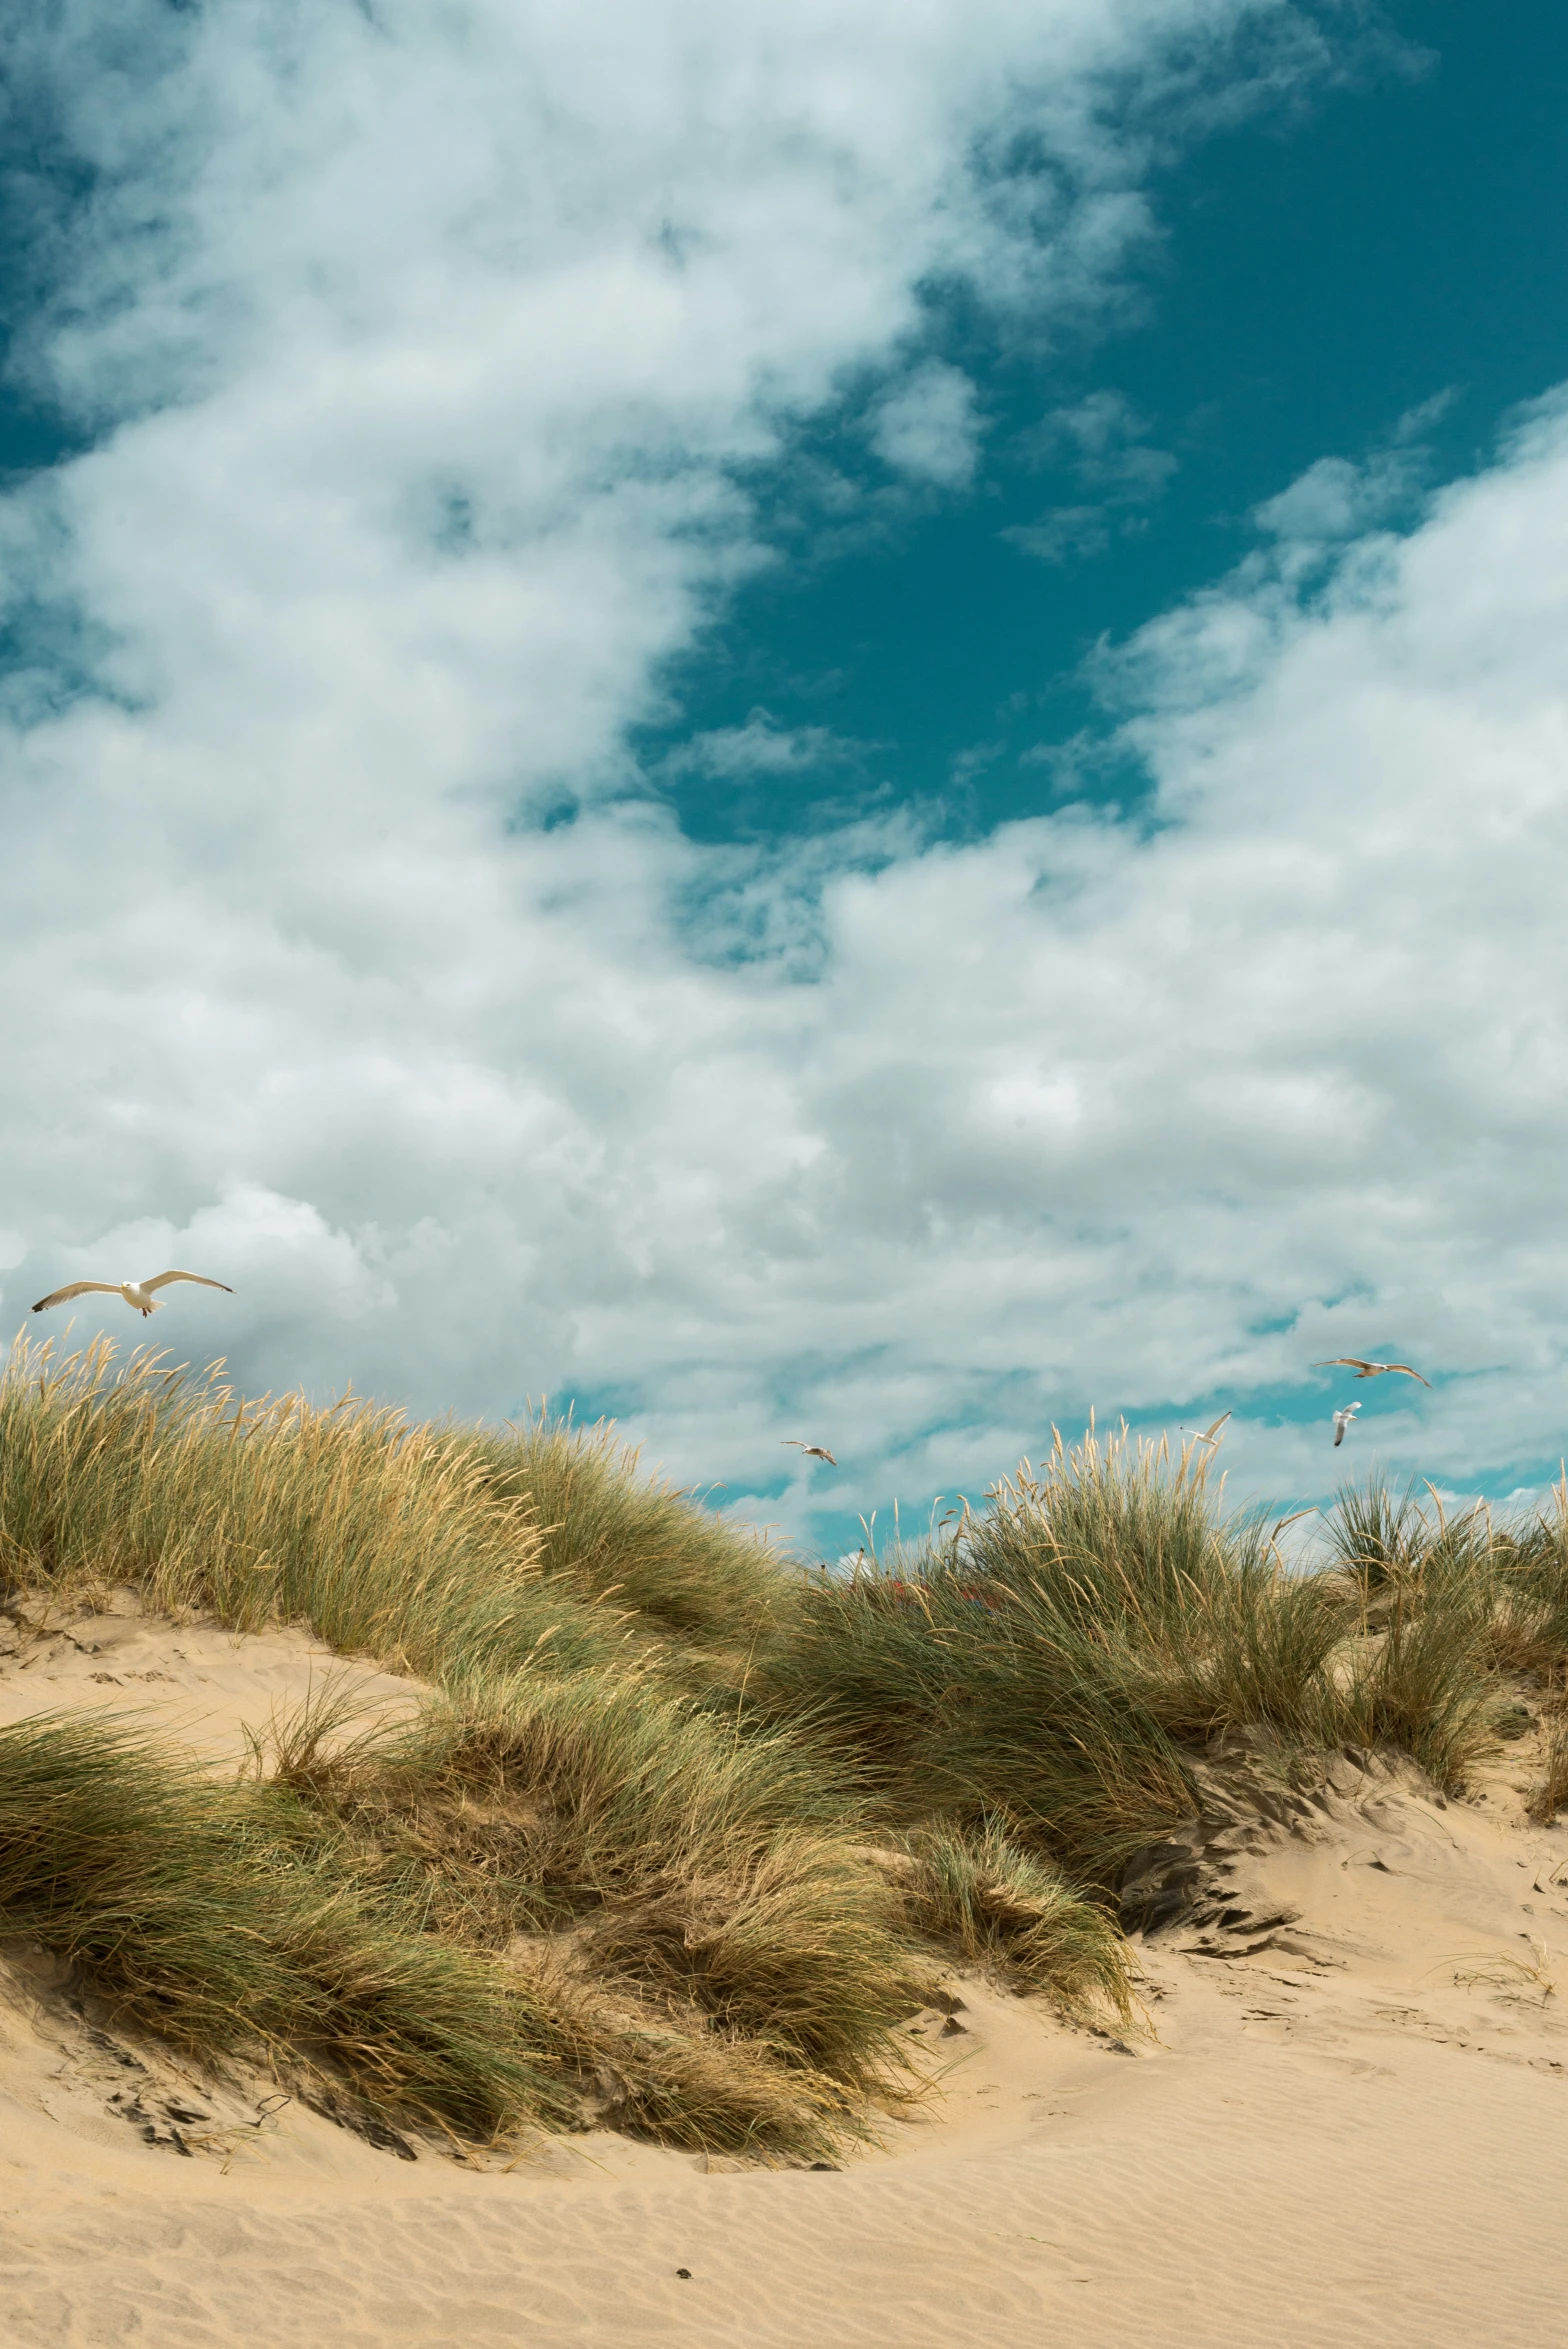 sand dune with grass on either side and seagulls flying over